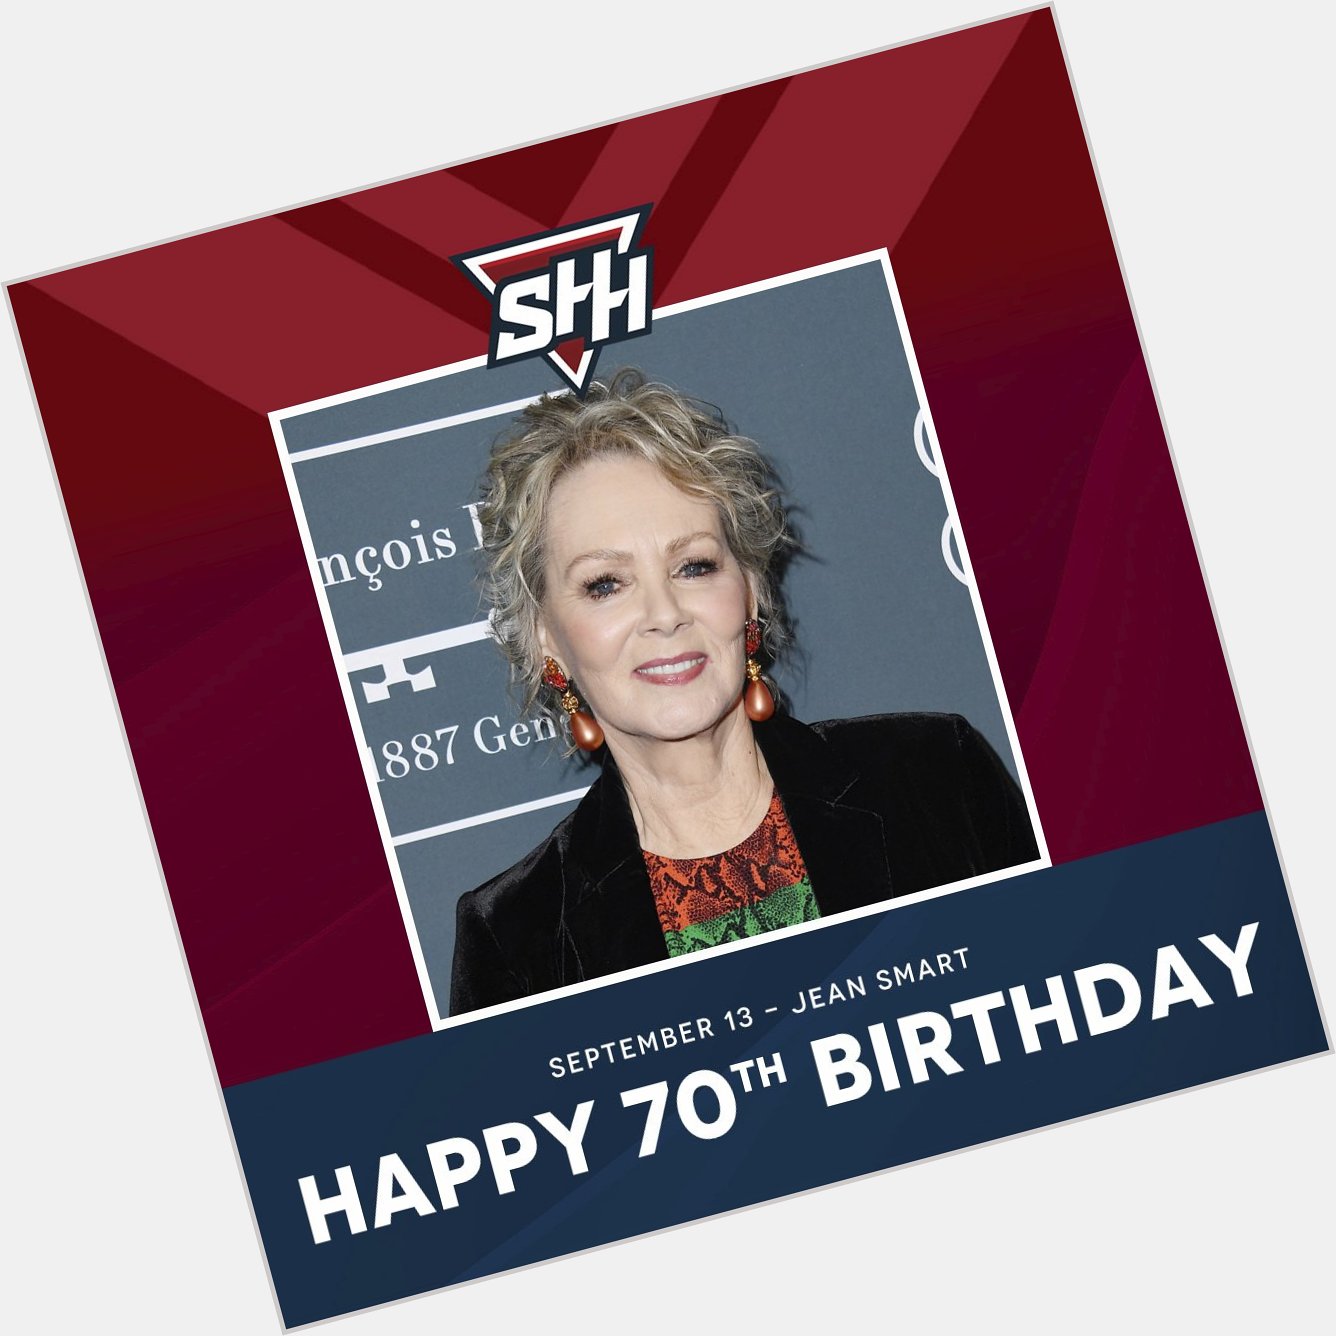 Happy Birthday to and Jean Smart! 